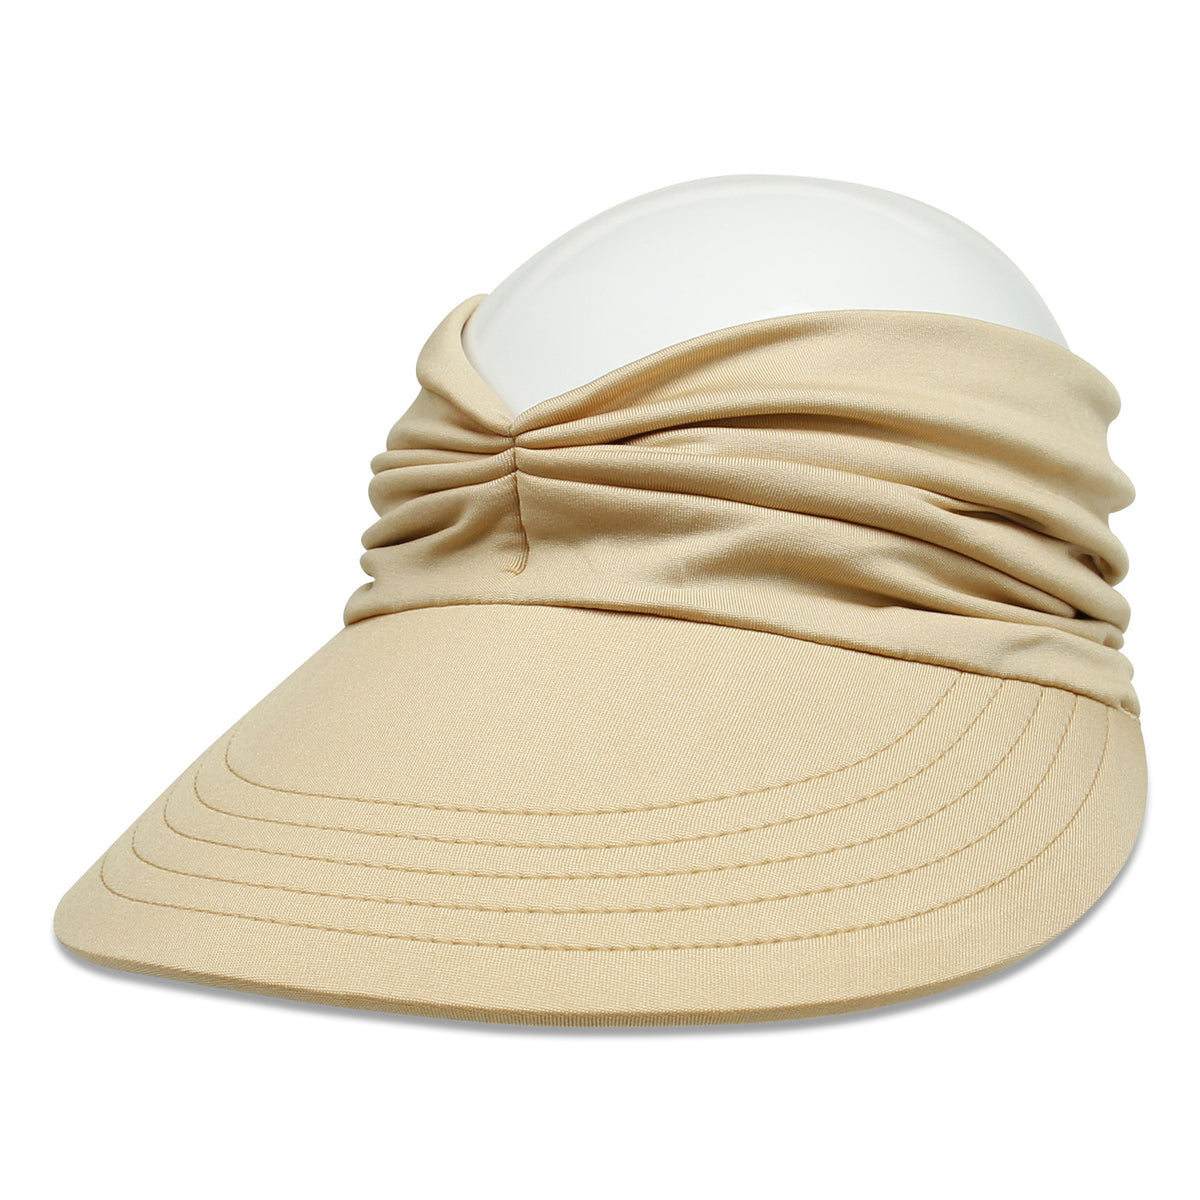 Ruched Visor in Assorted Colors - RTS